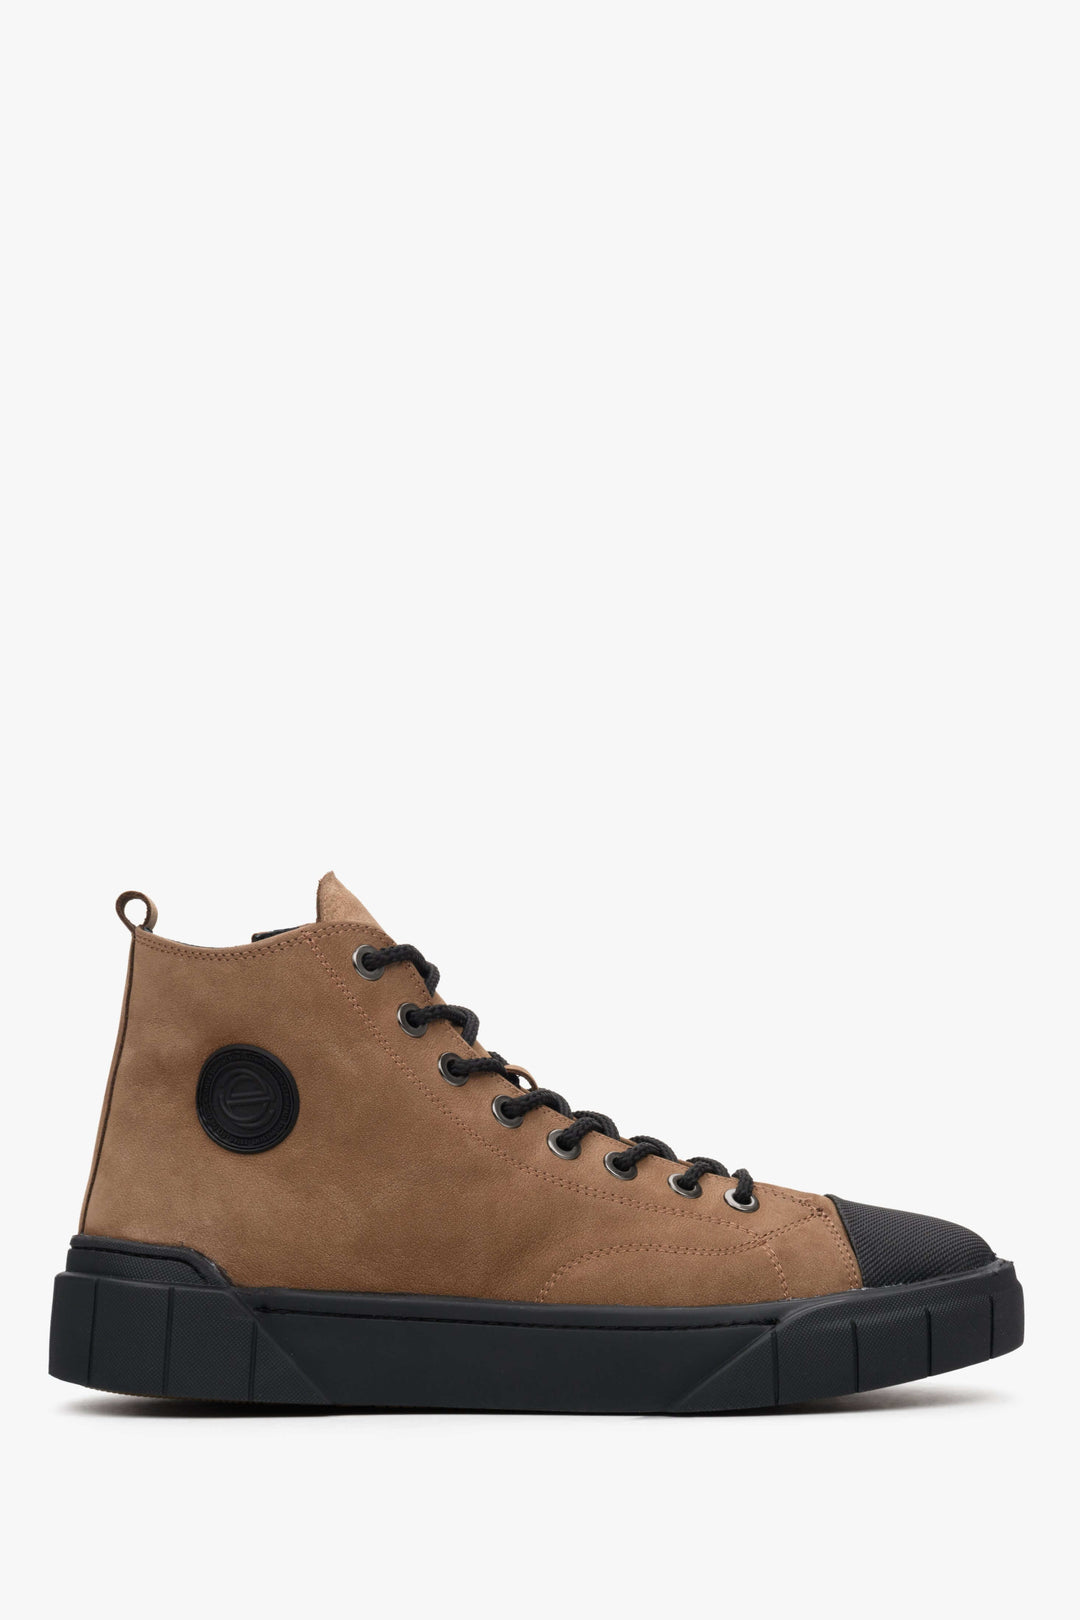 High-top men's lace-up sneakers in brown by Estro - shoe profile.